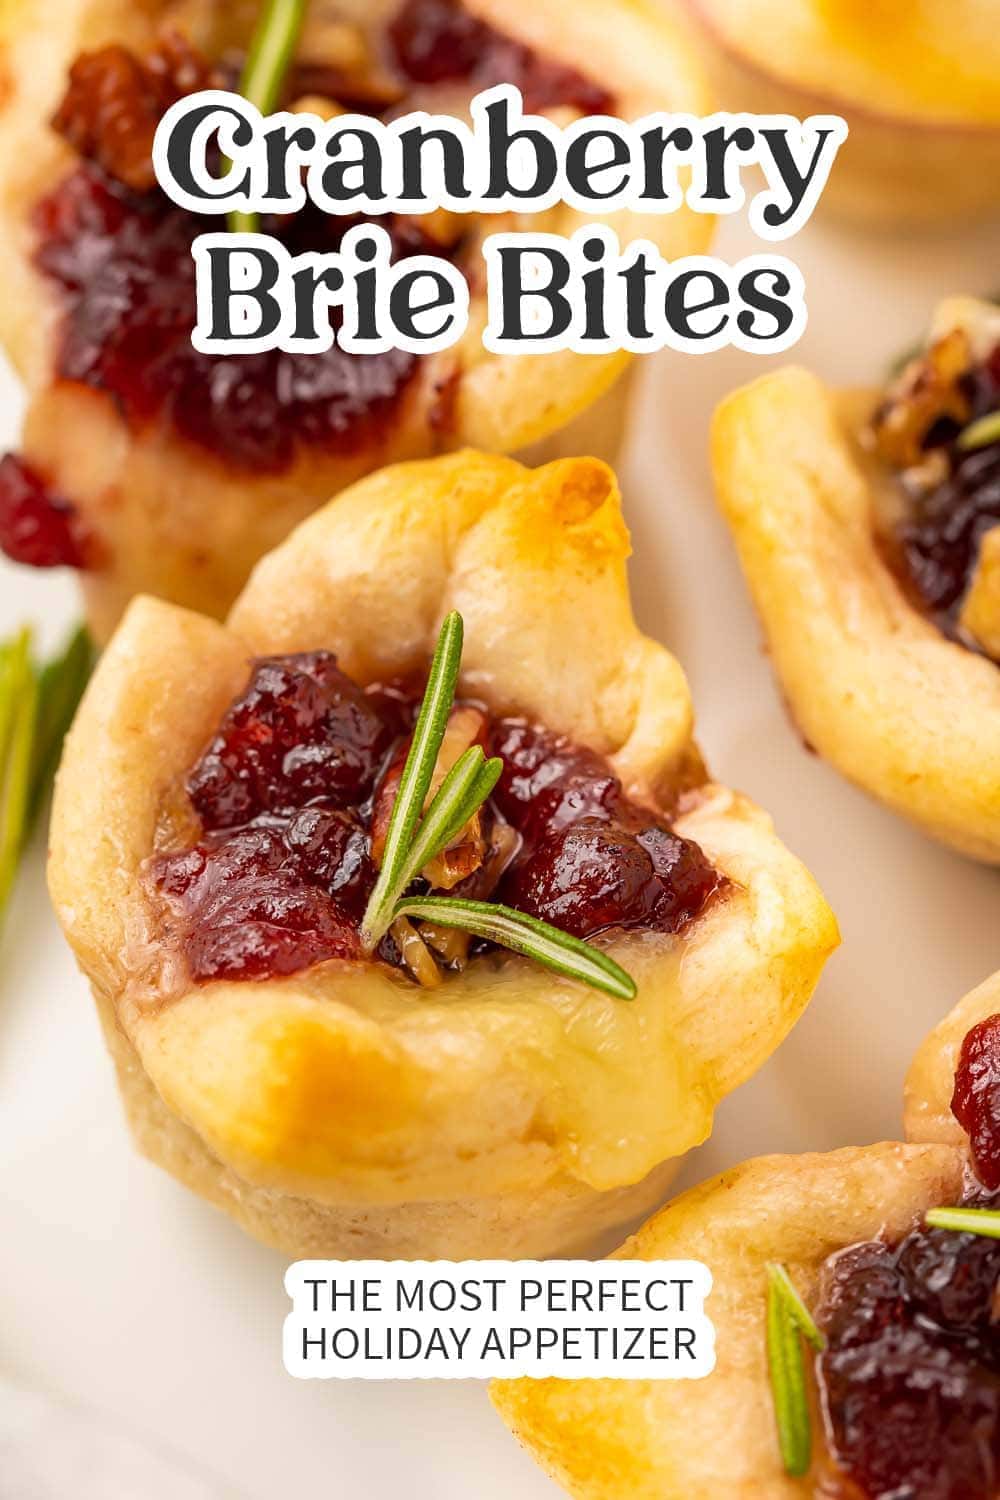 The Best Ever Cranberry Brie Bites - 40 Aprons